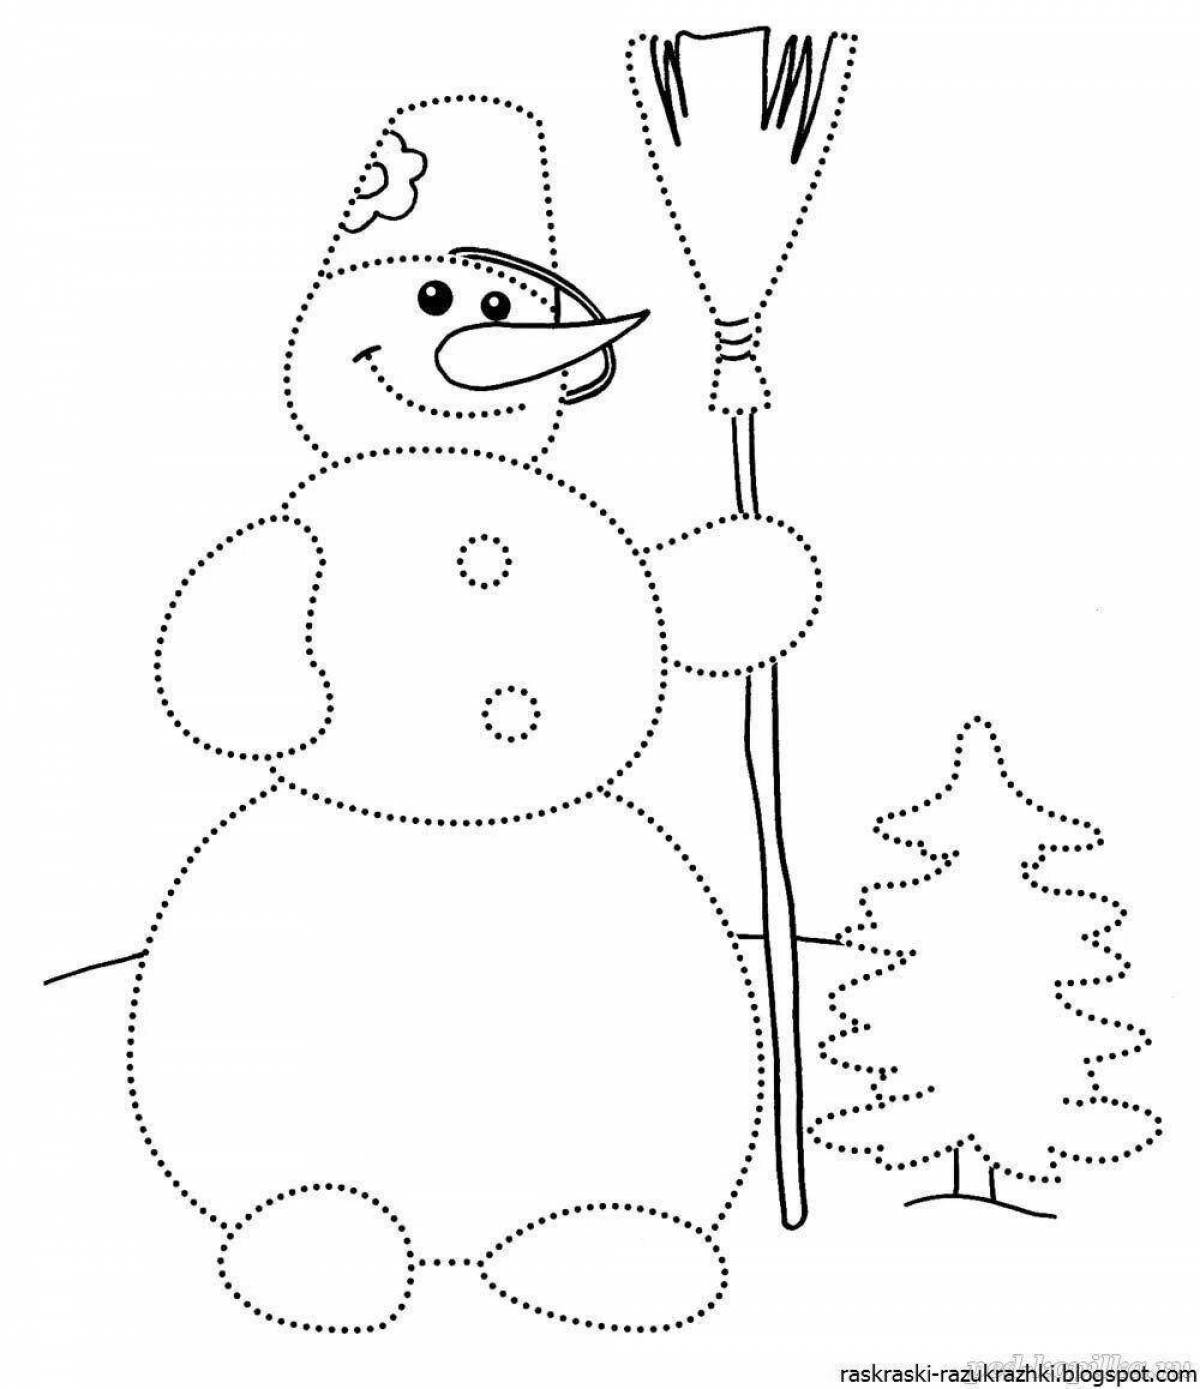 Animated children's coloring book snowman